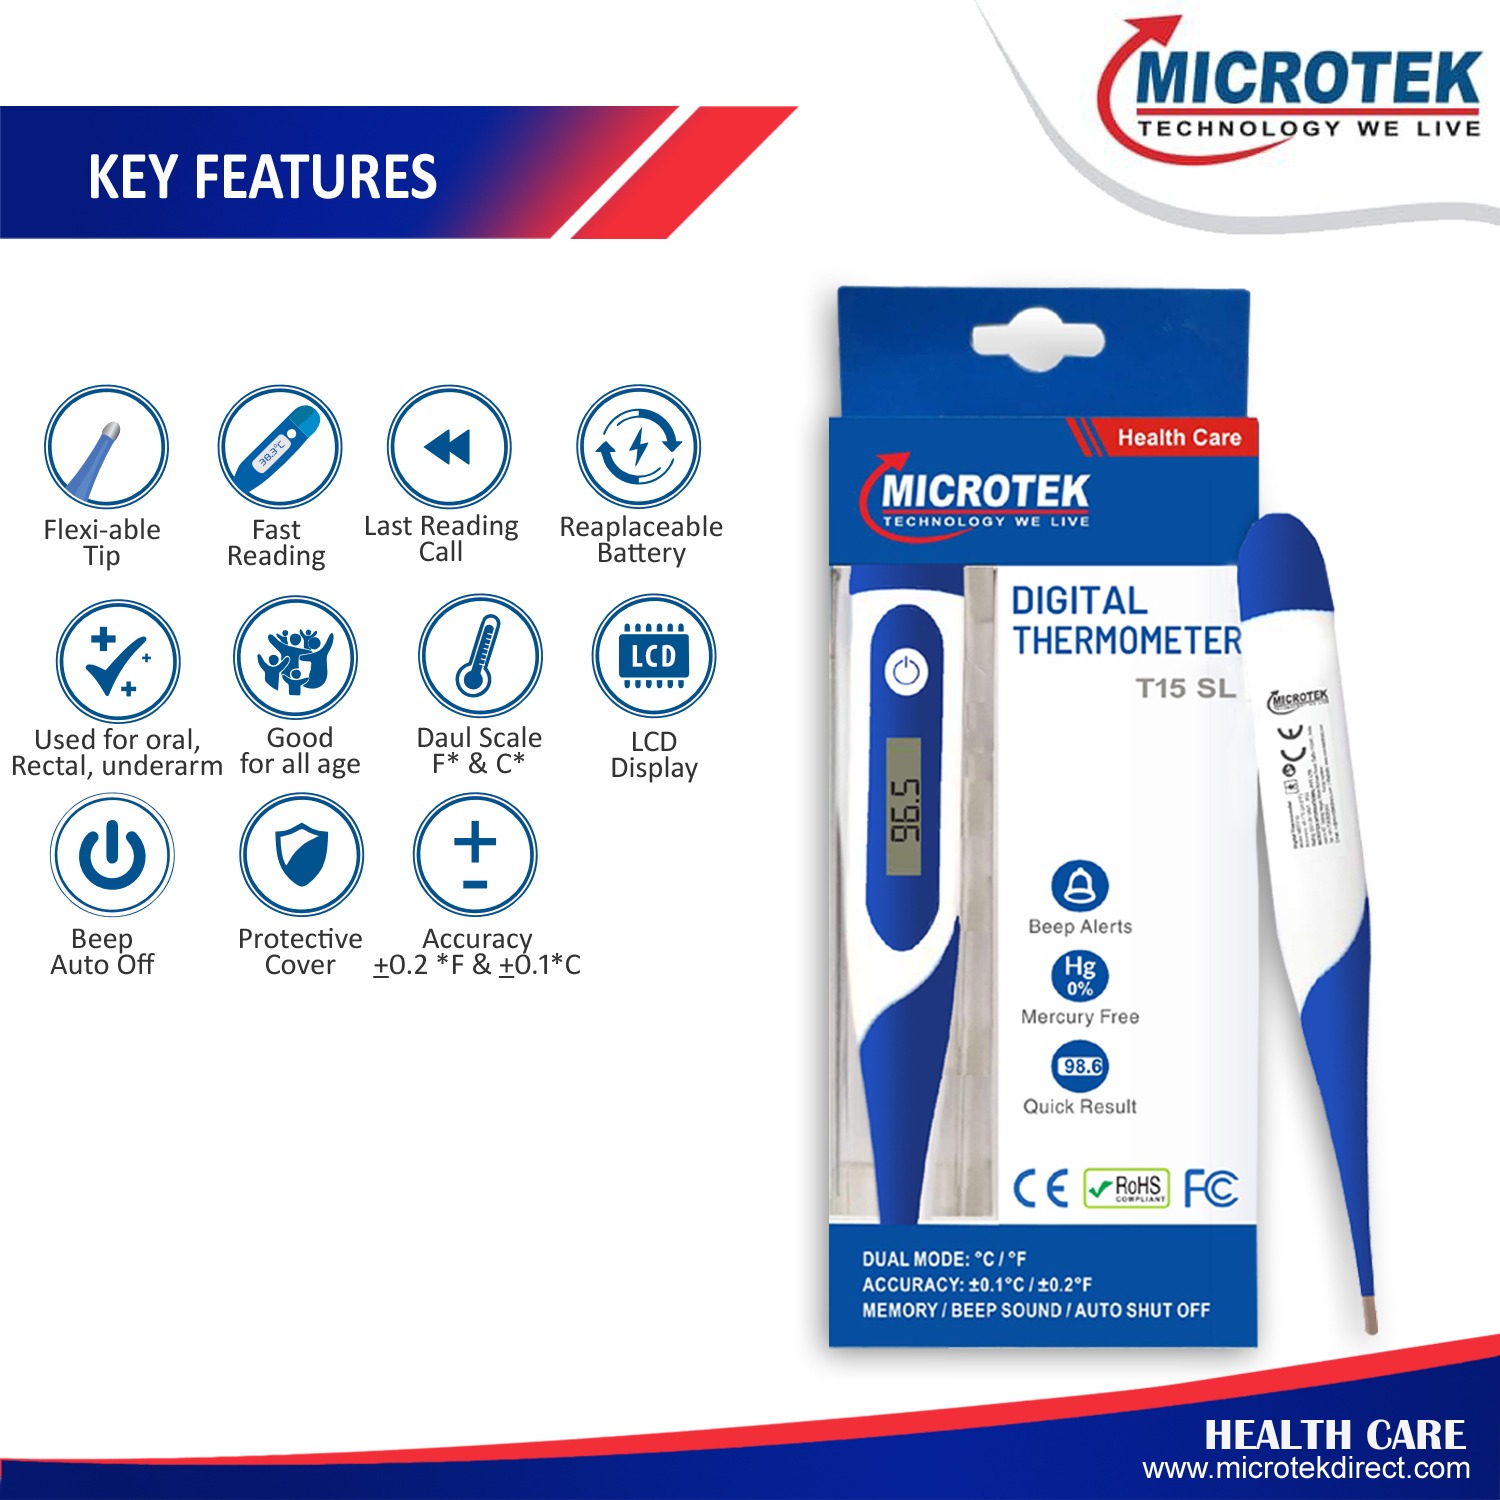 https://www.microtekdirect.com/product-images/2022/02/05/158/microtek-digital-thermometer-t15-sl-3.webp